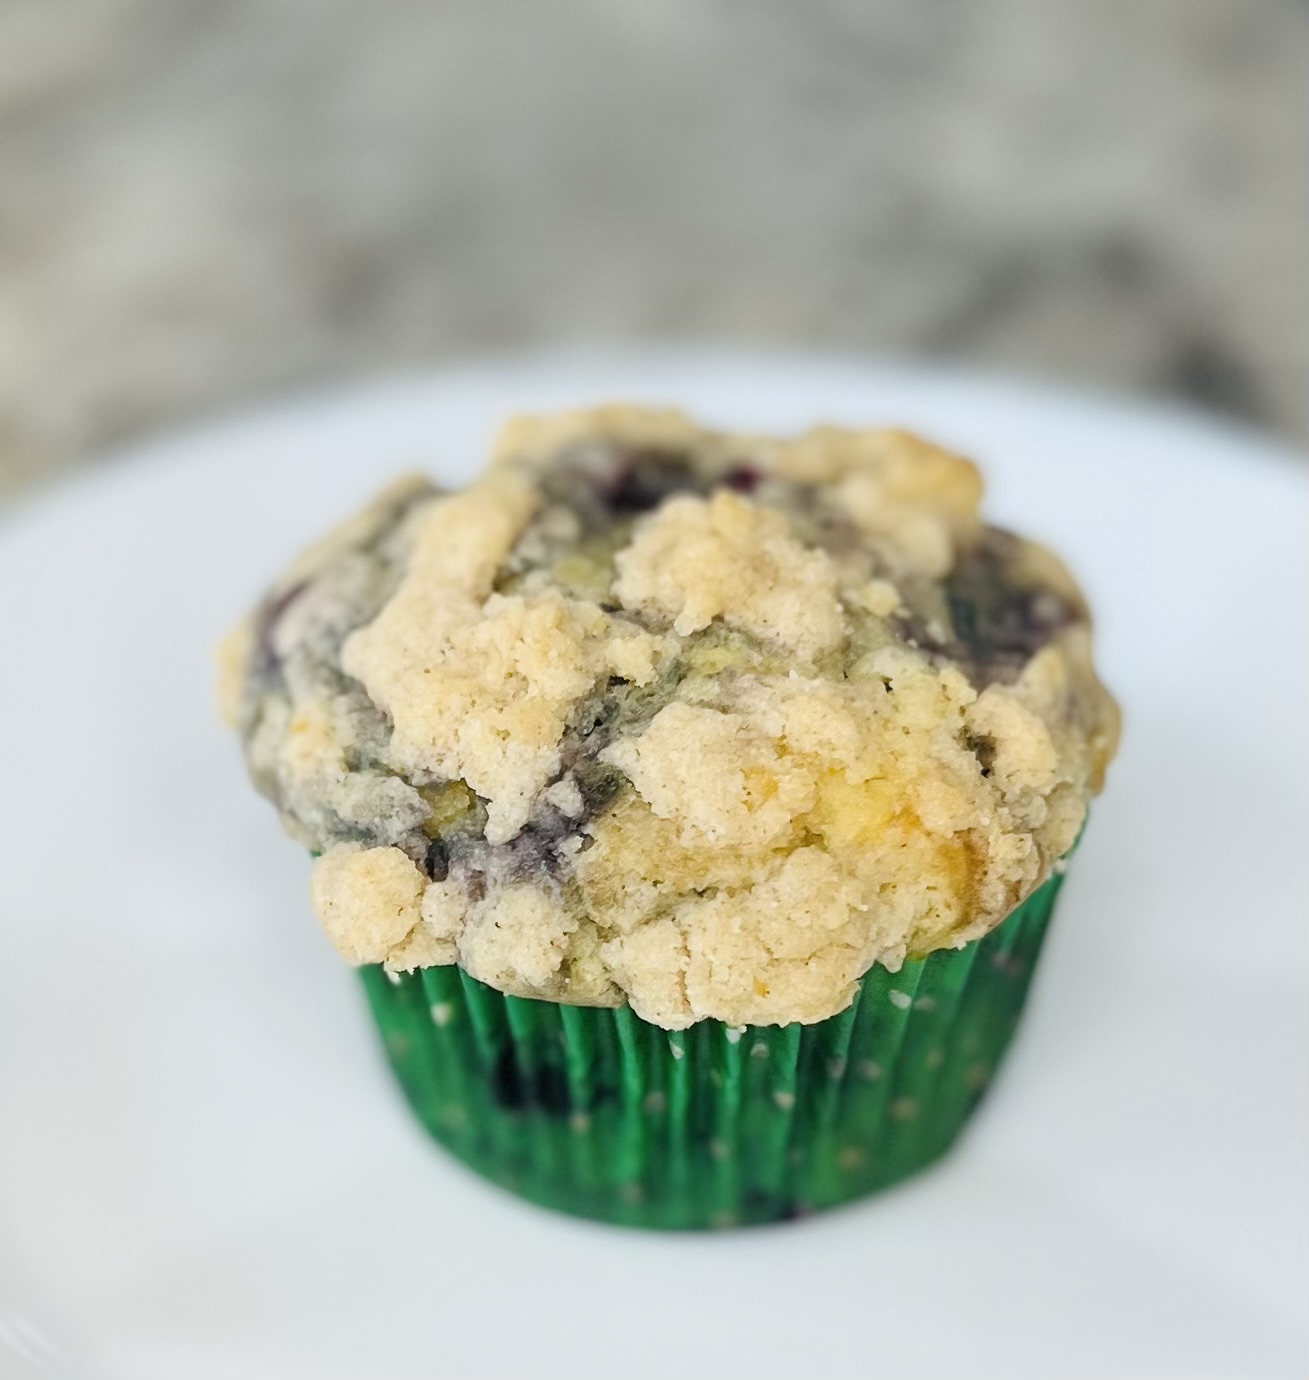 Blueberry muffin with streusel crumble